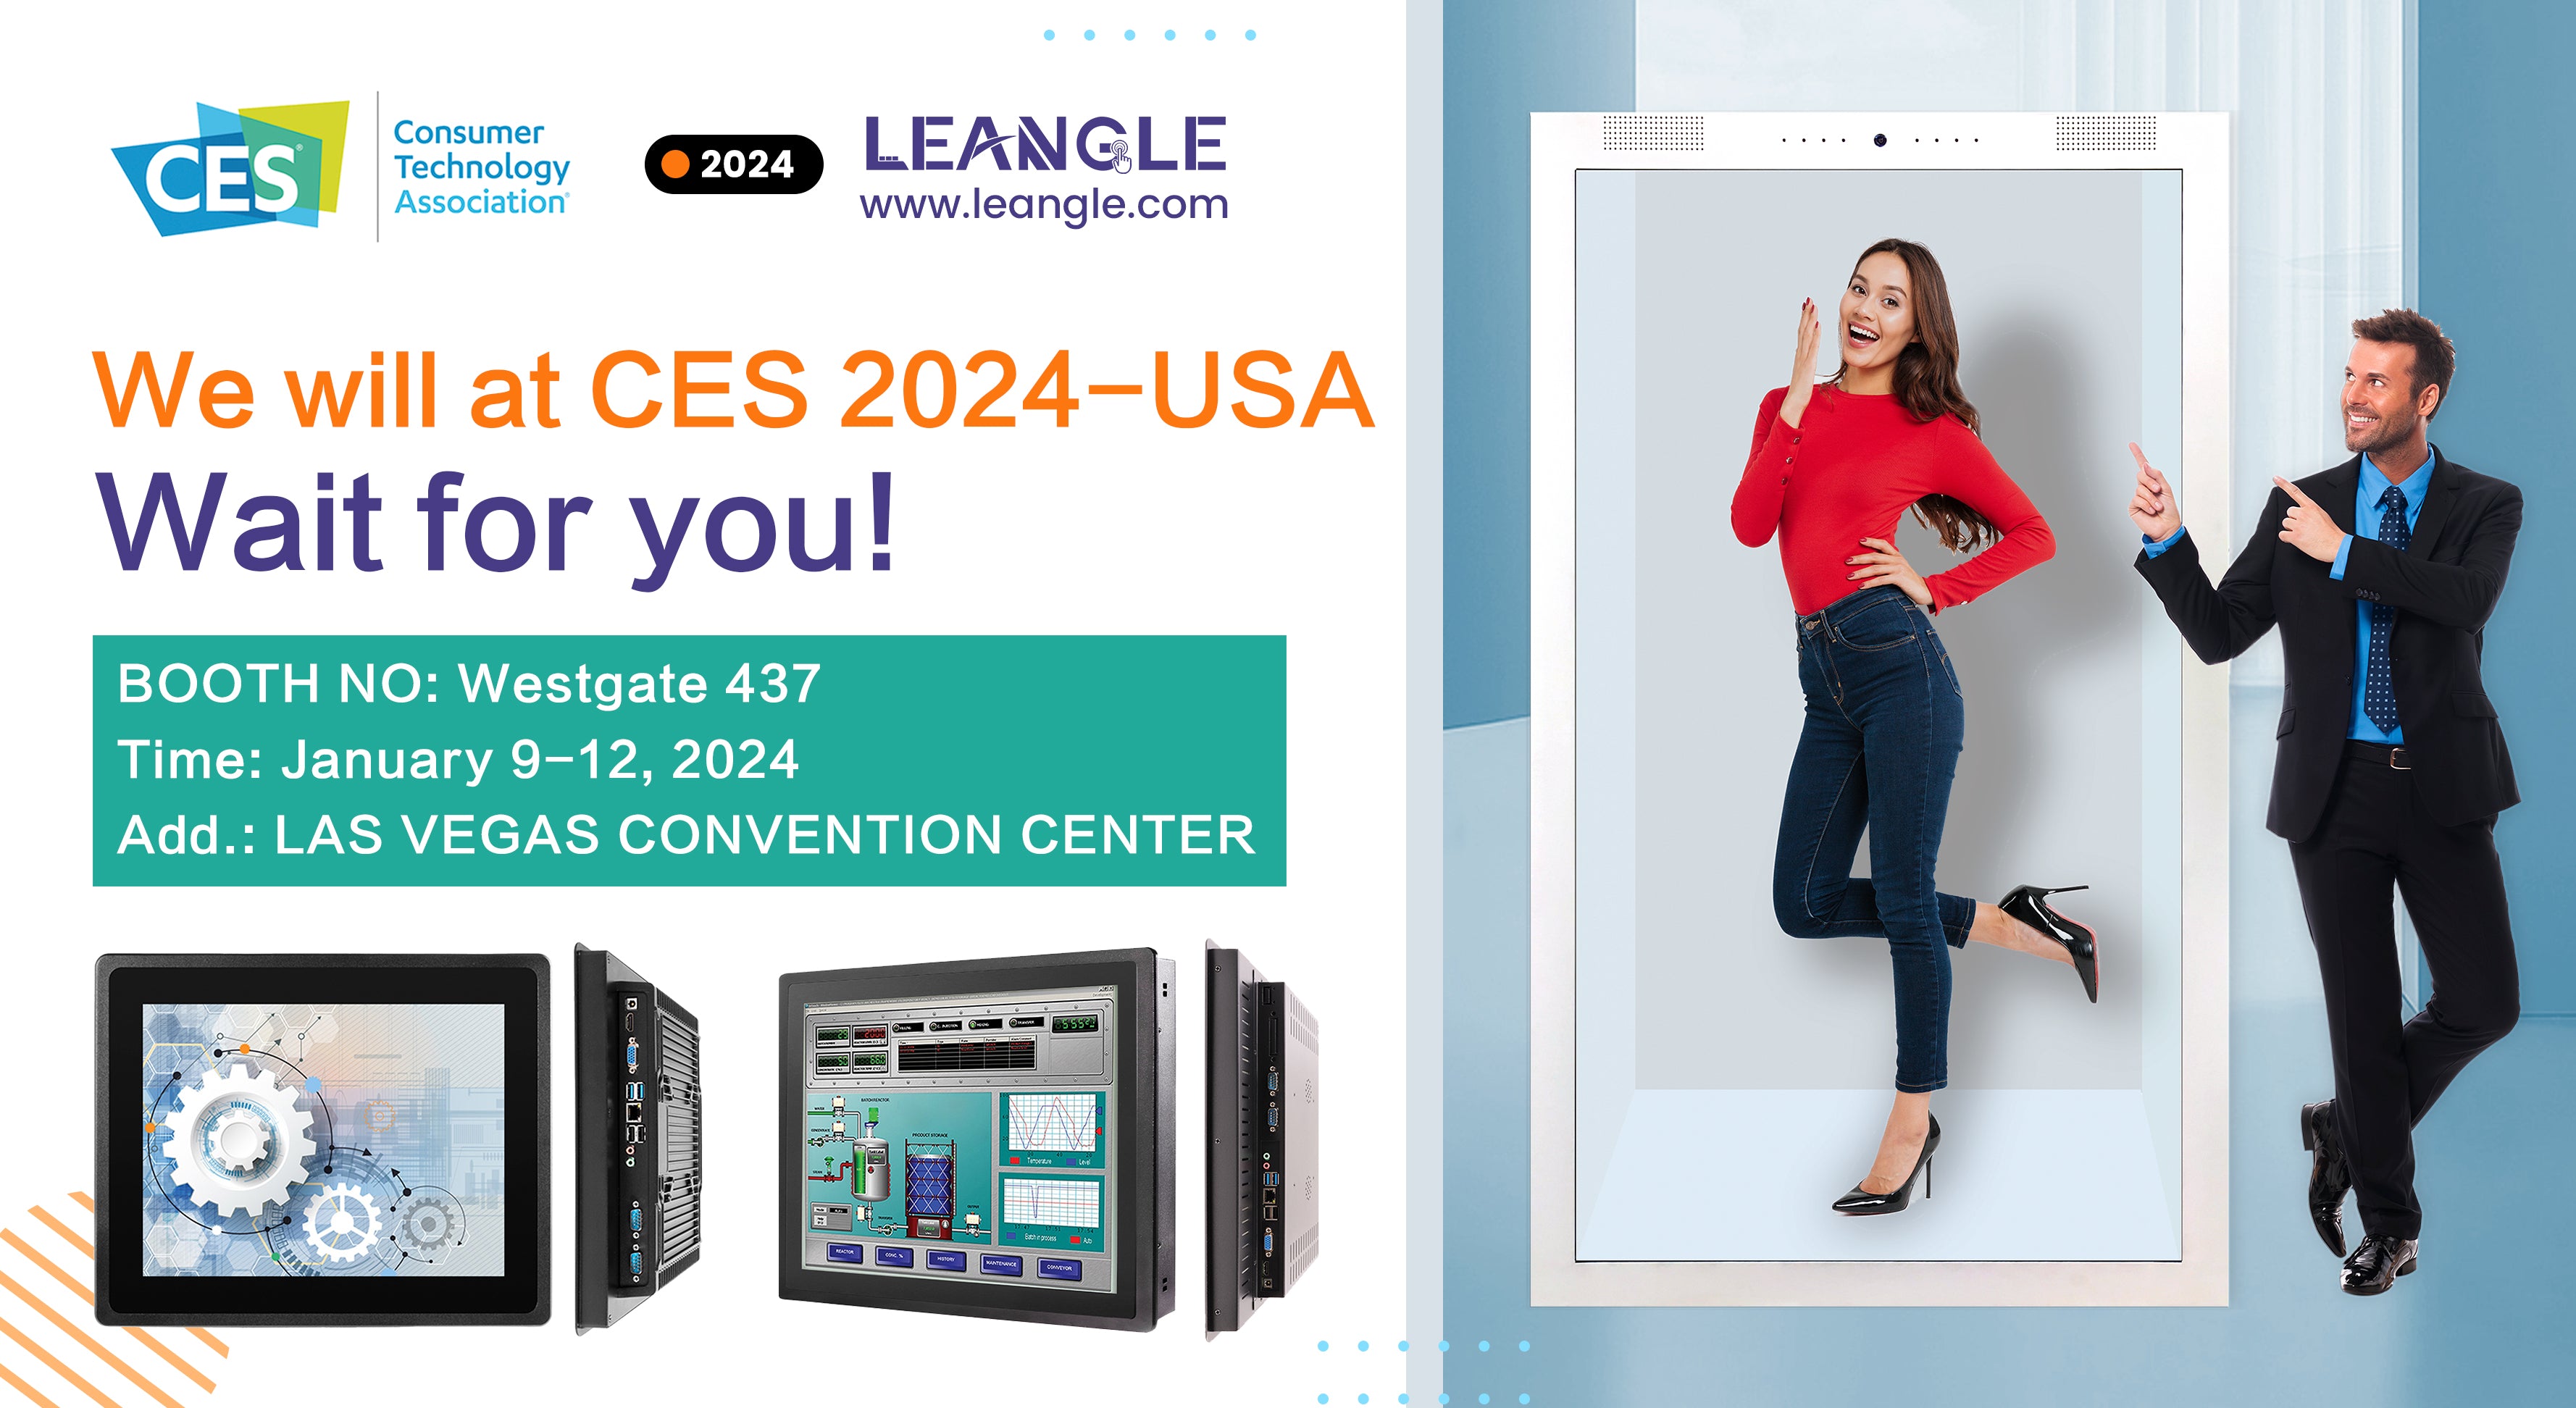 See you at CES 2024 - Las Veagas!